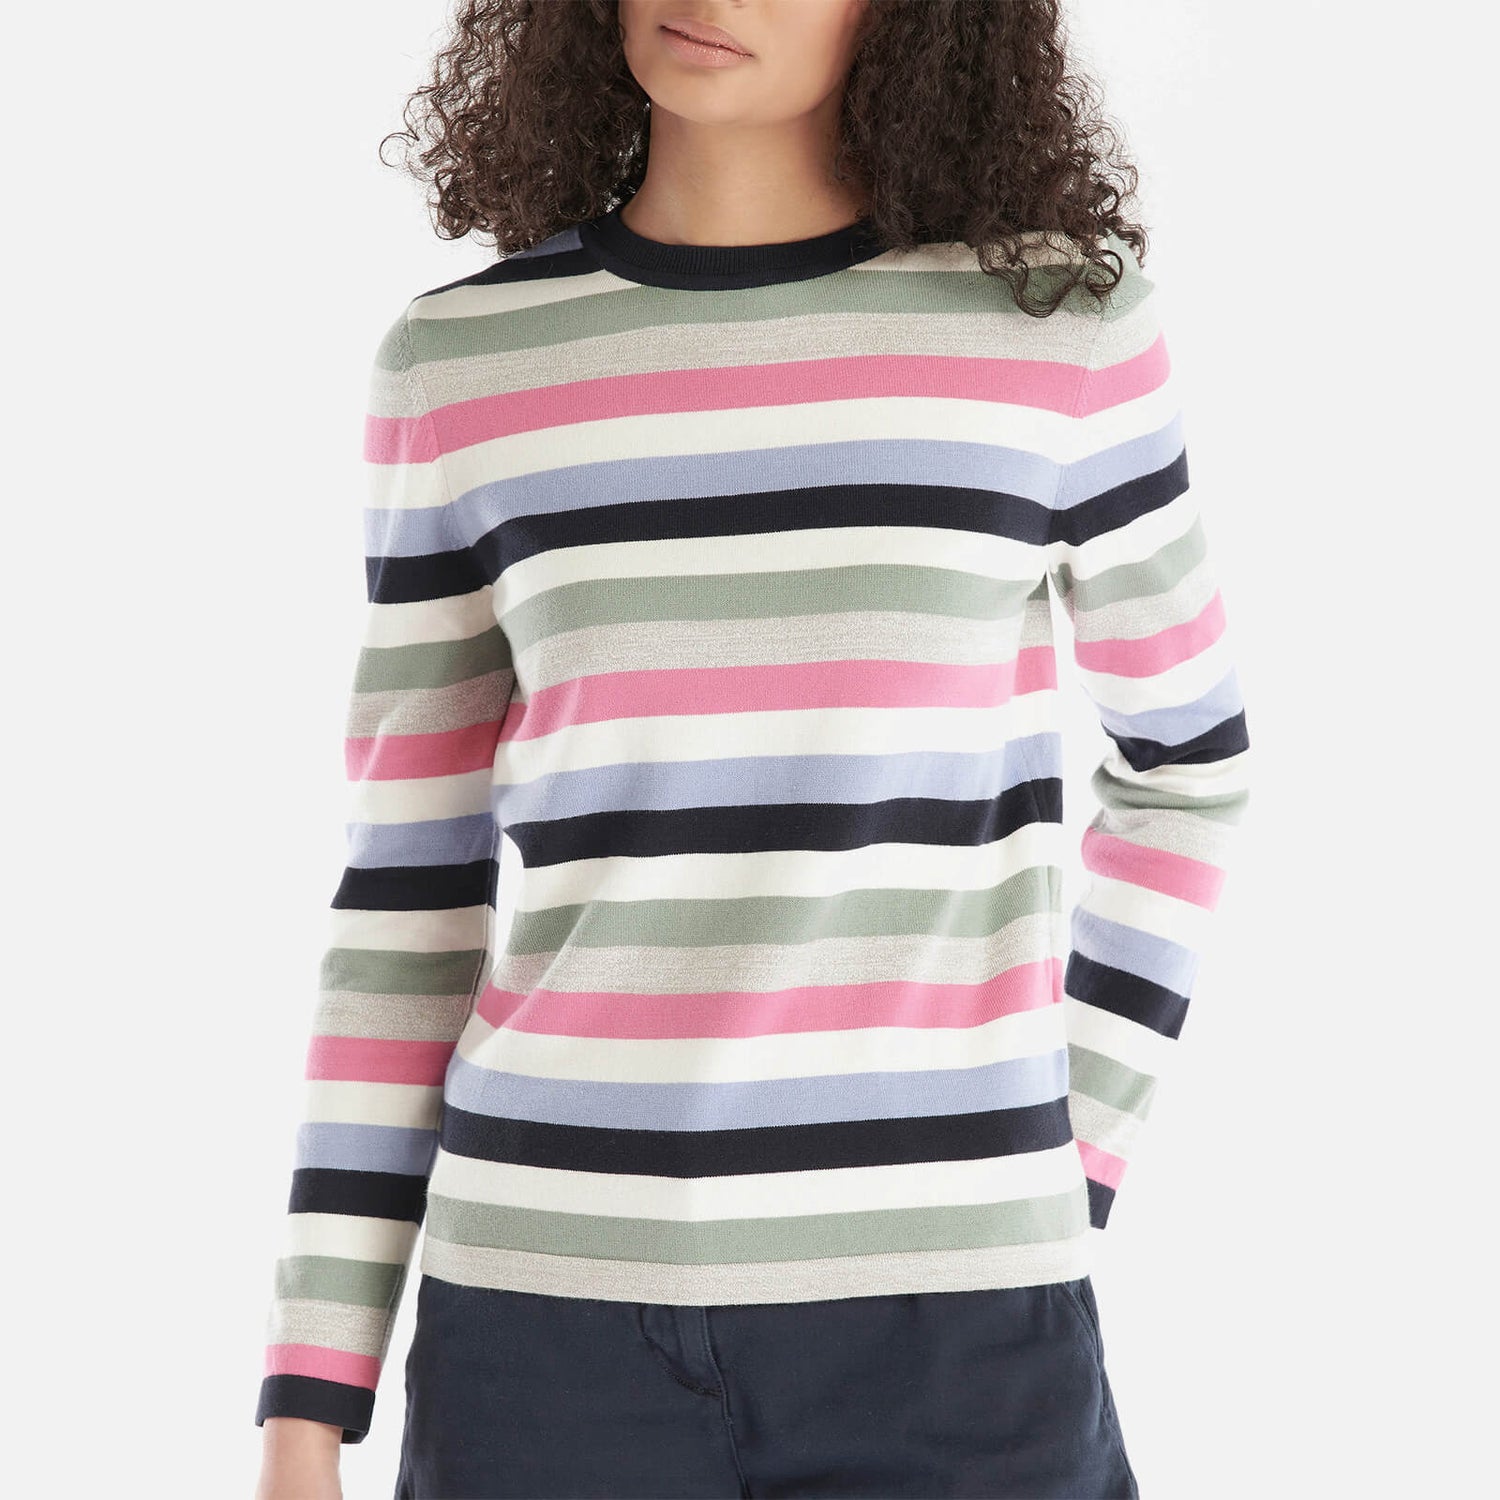 Barbour Padstow Striped Cotton Jumper - UK 10